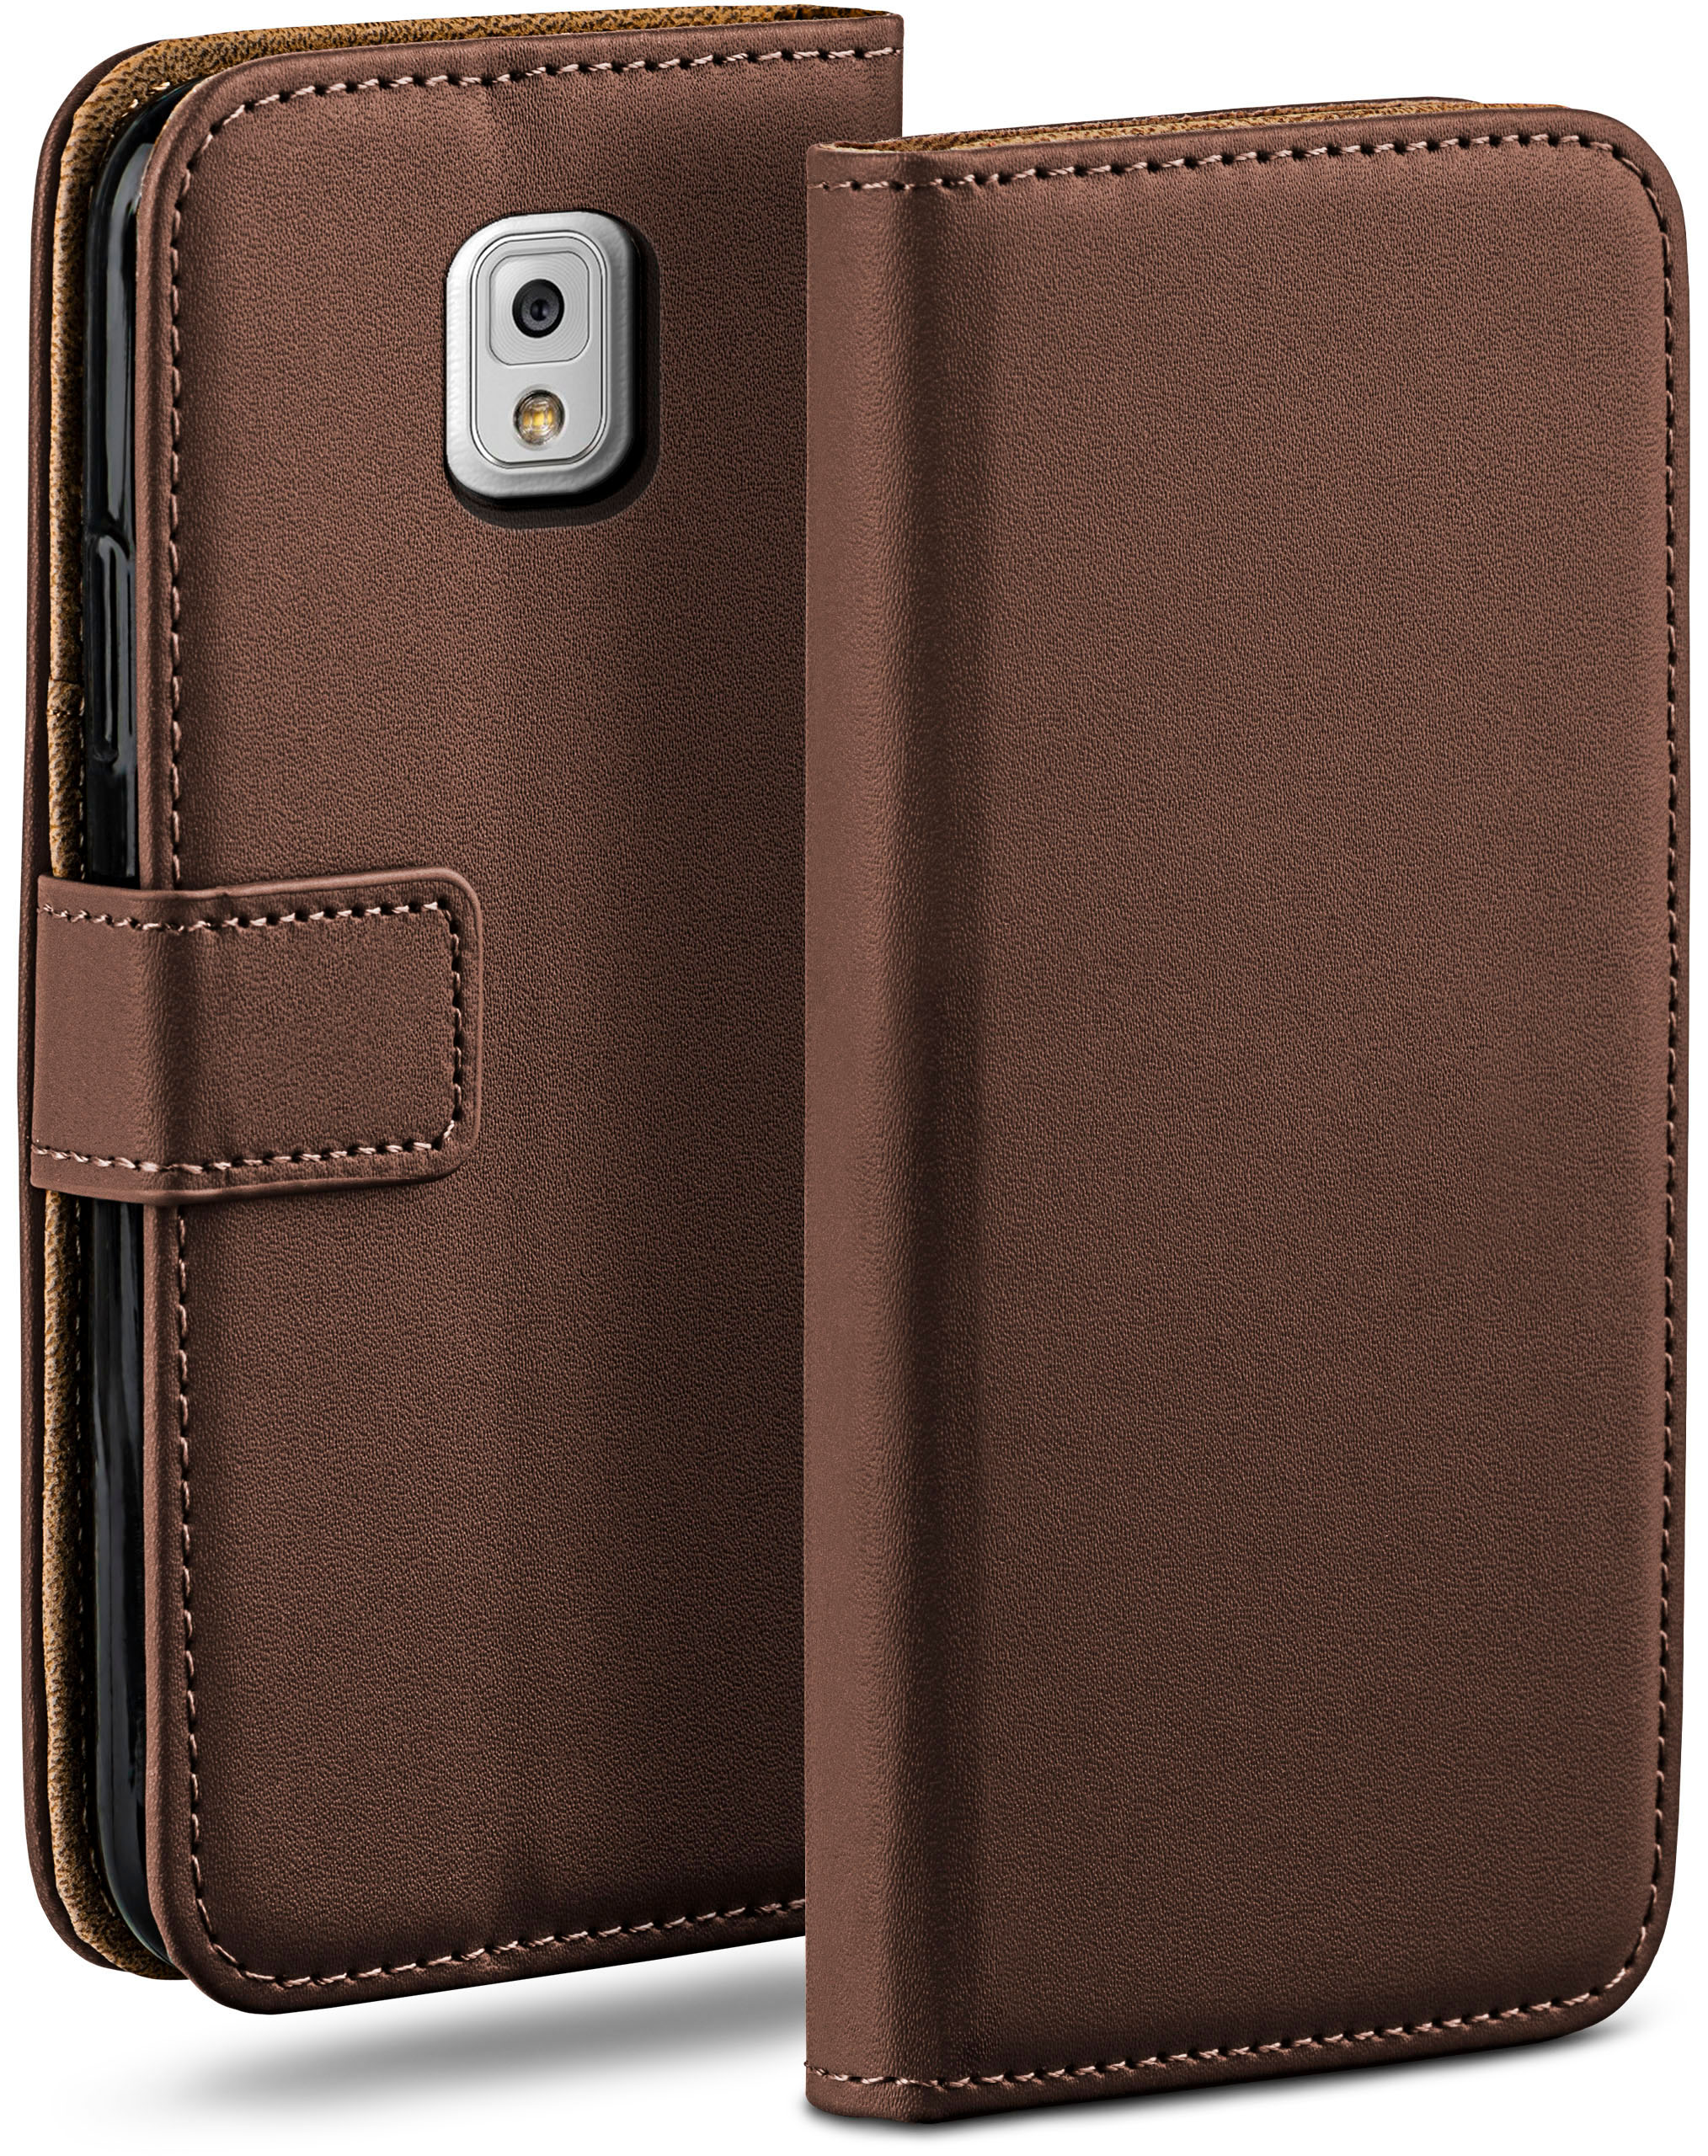 Oxide-Brown MOEX Bookcover, 3, Book Galaxy Samsung, Case, Note